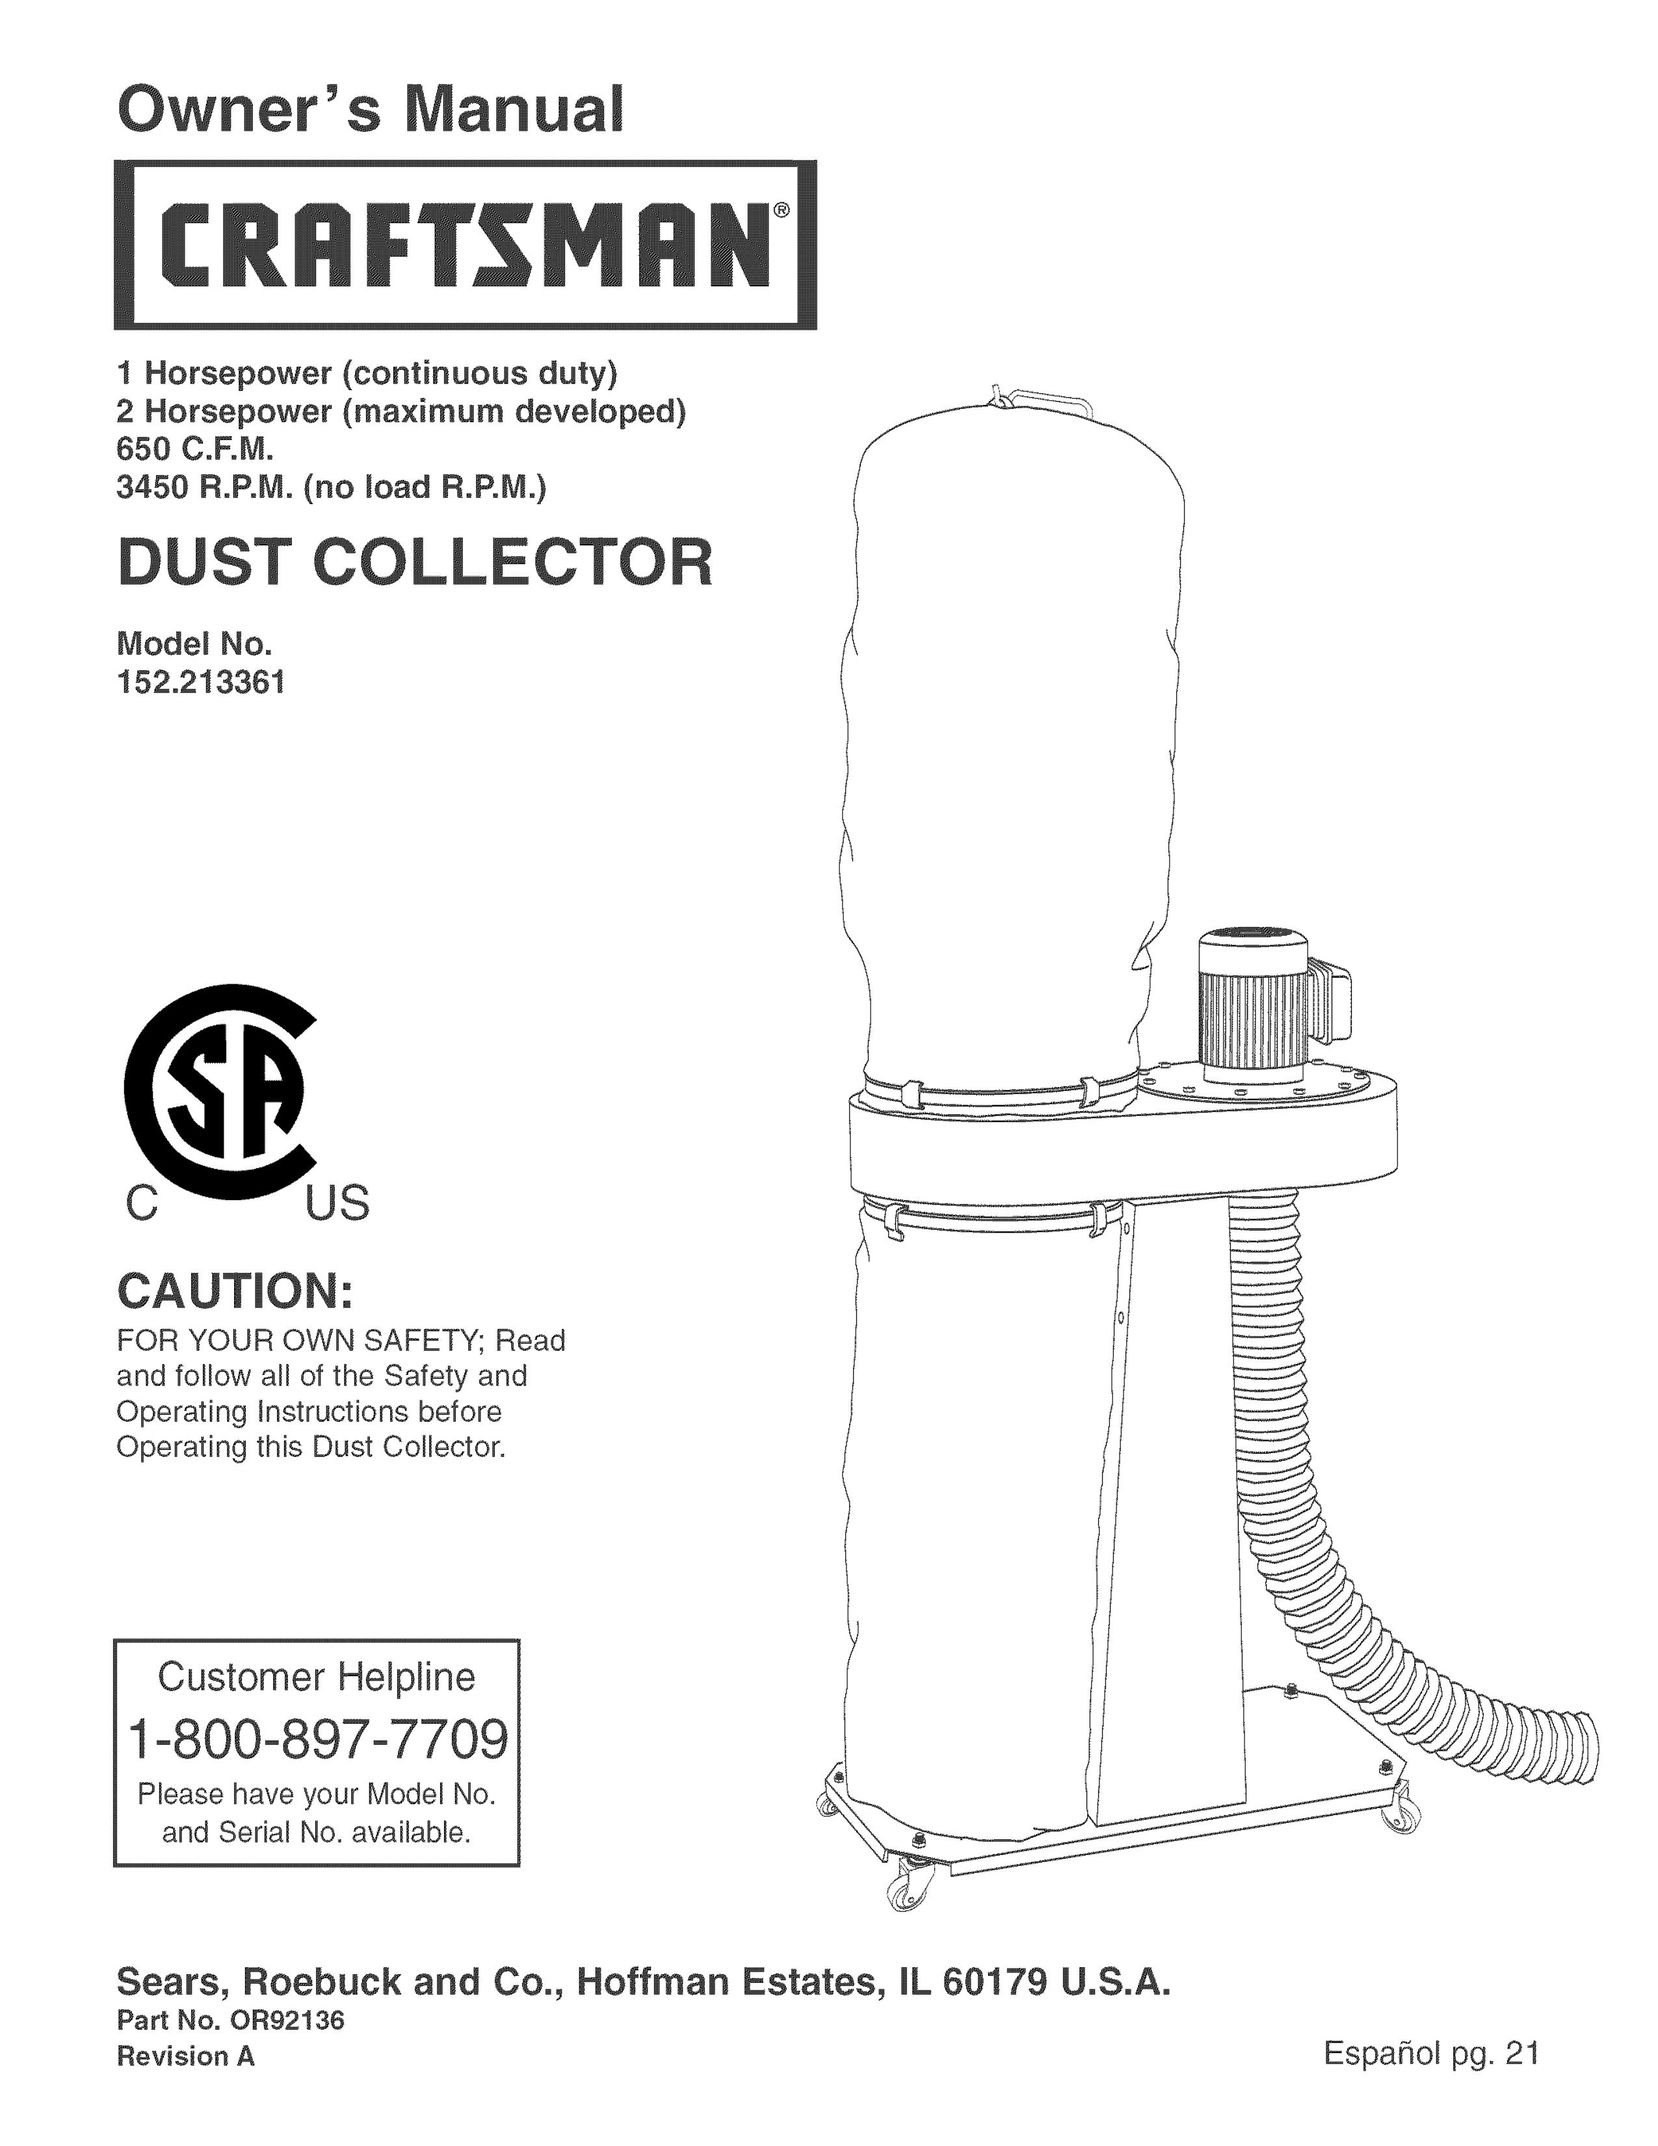 Craftsman 152.213361 Dust Collector User Manual